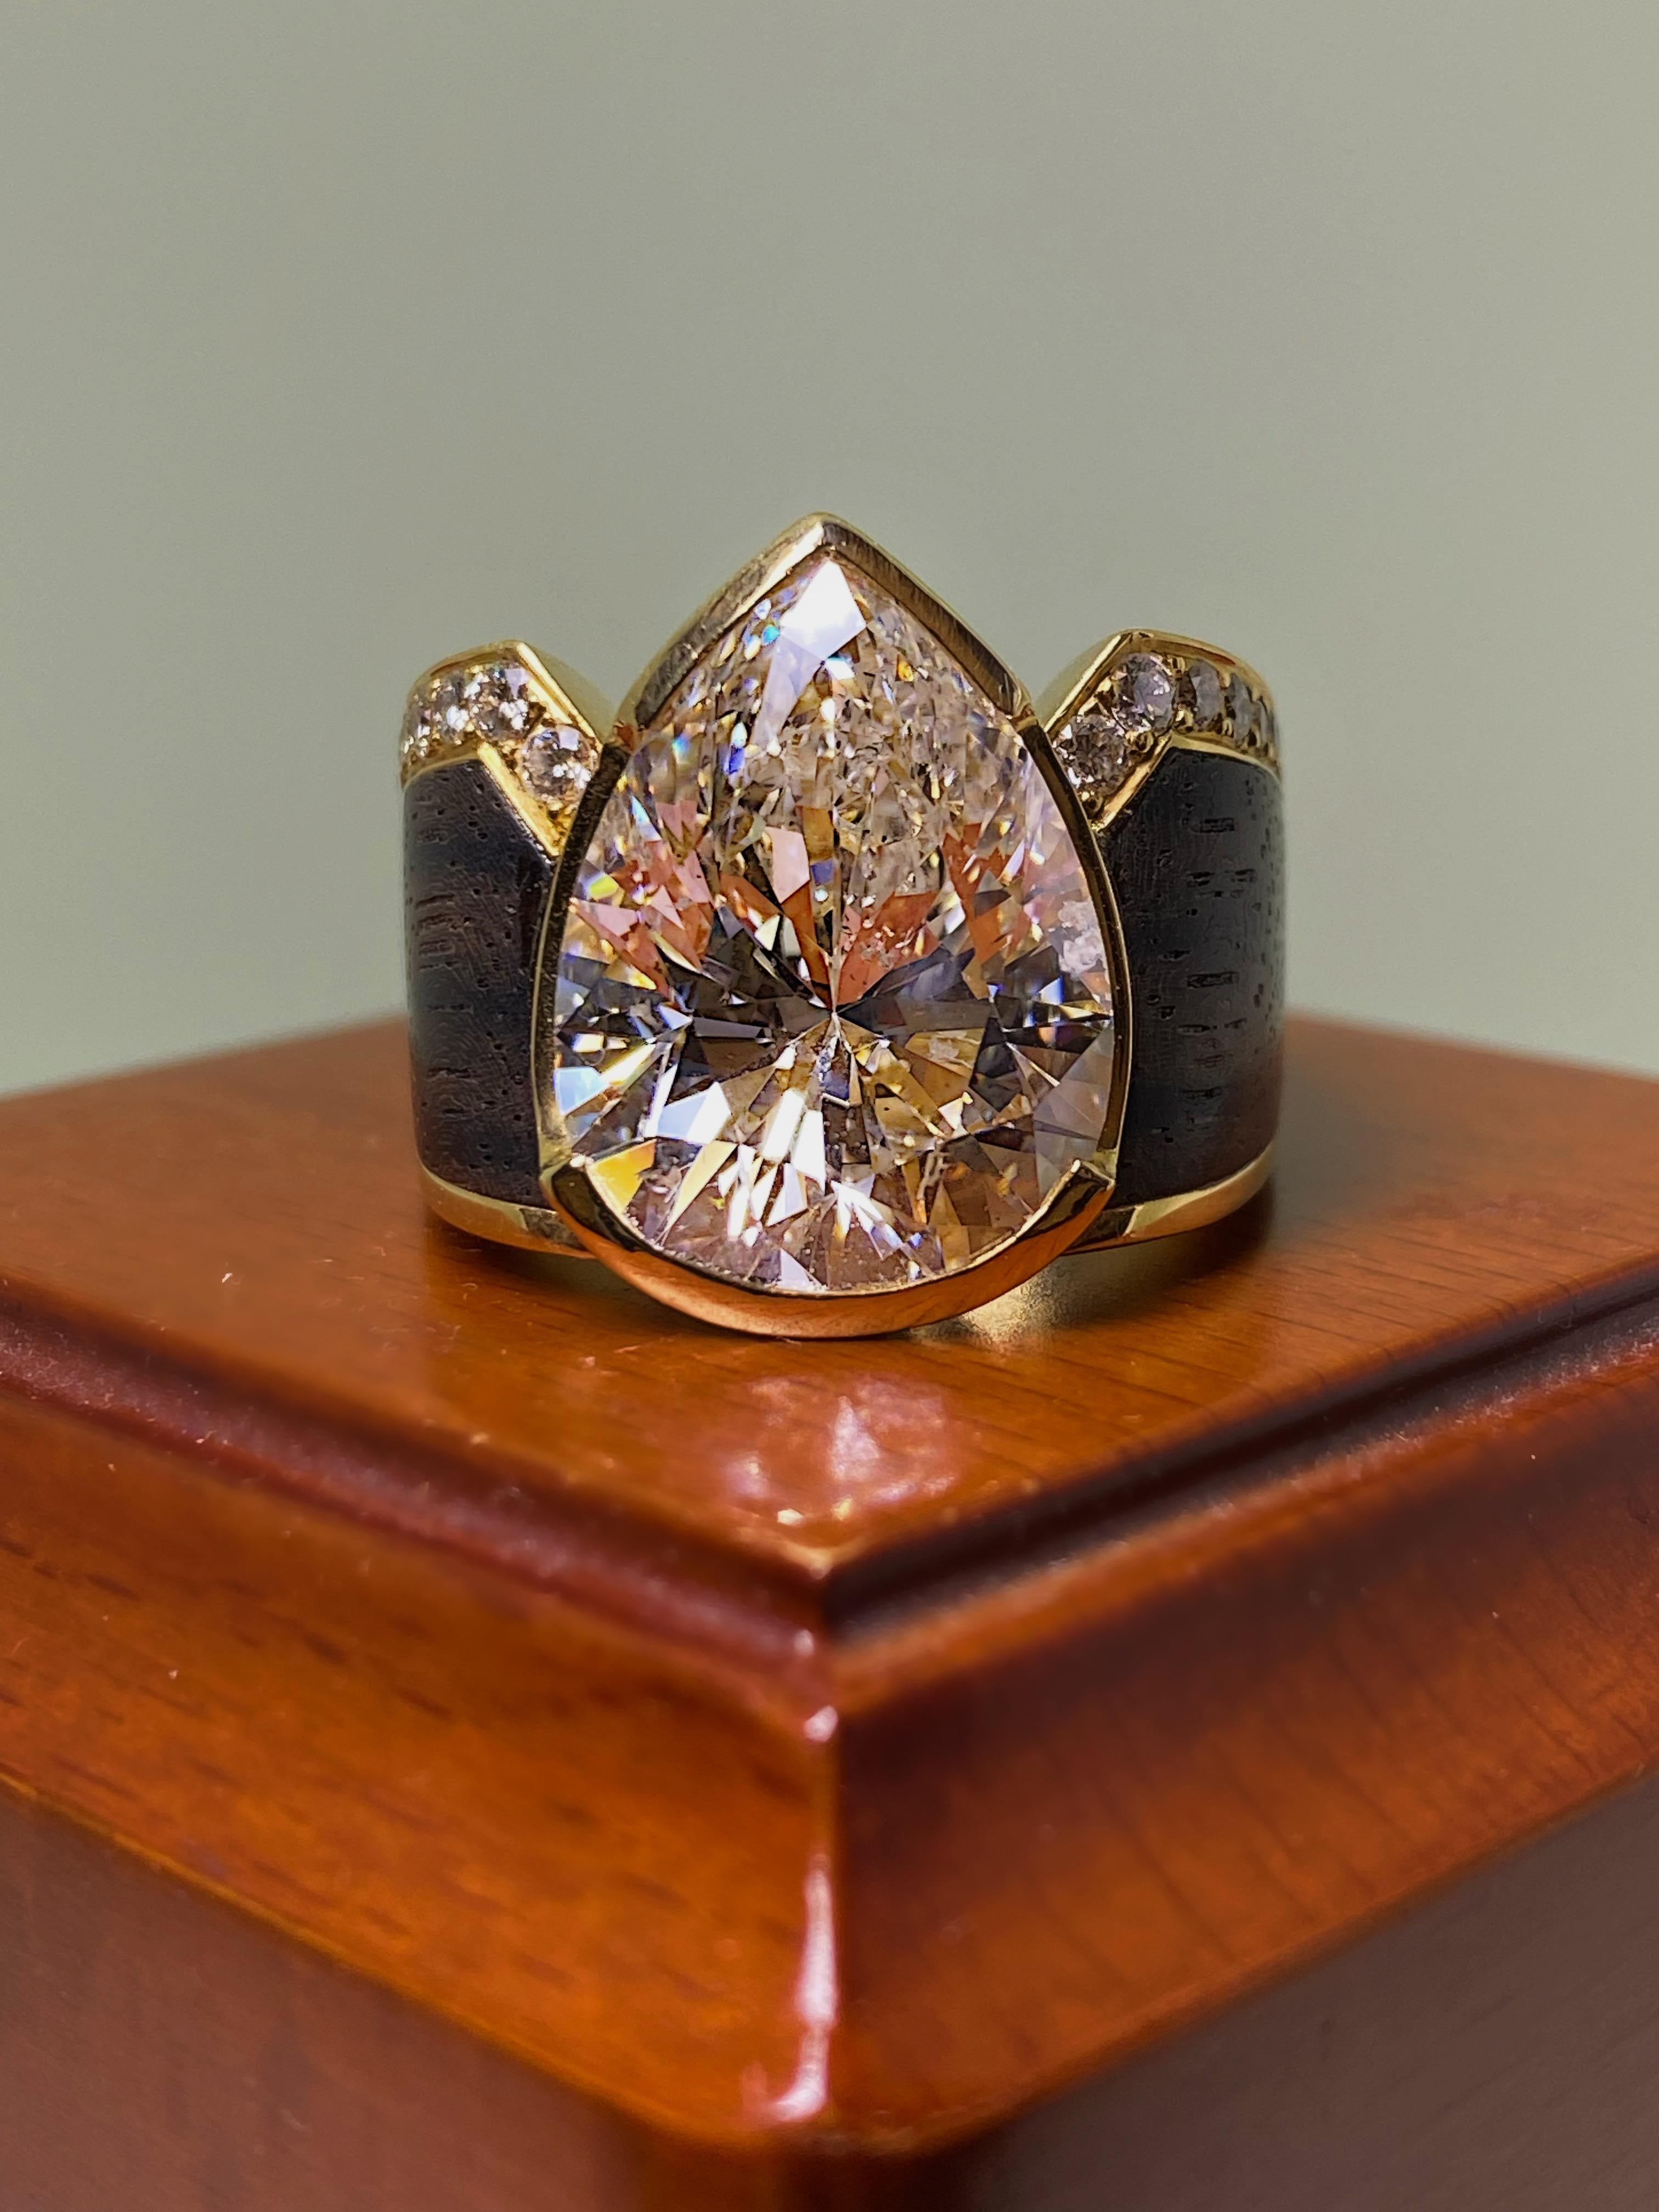 Just imagine being an owner of this majestic one-of-a-kind jewelry piece & wearing it on a finger...

Pear-shaped diamond rings have been favoured by celebrities like Elizabeth Taylor & Victoria Beckham & 
picked by Margot Robbie & Paris Hilton as